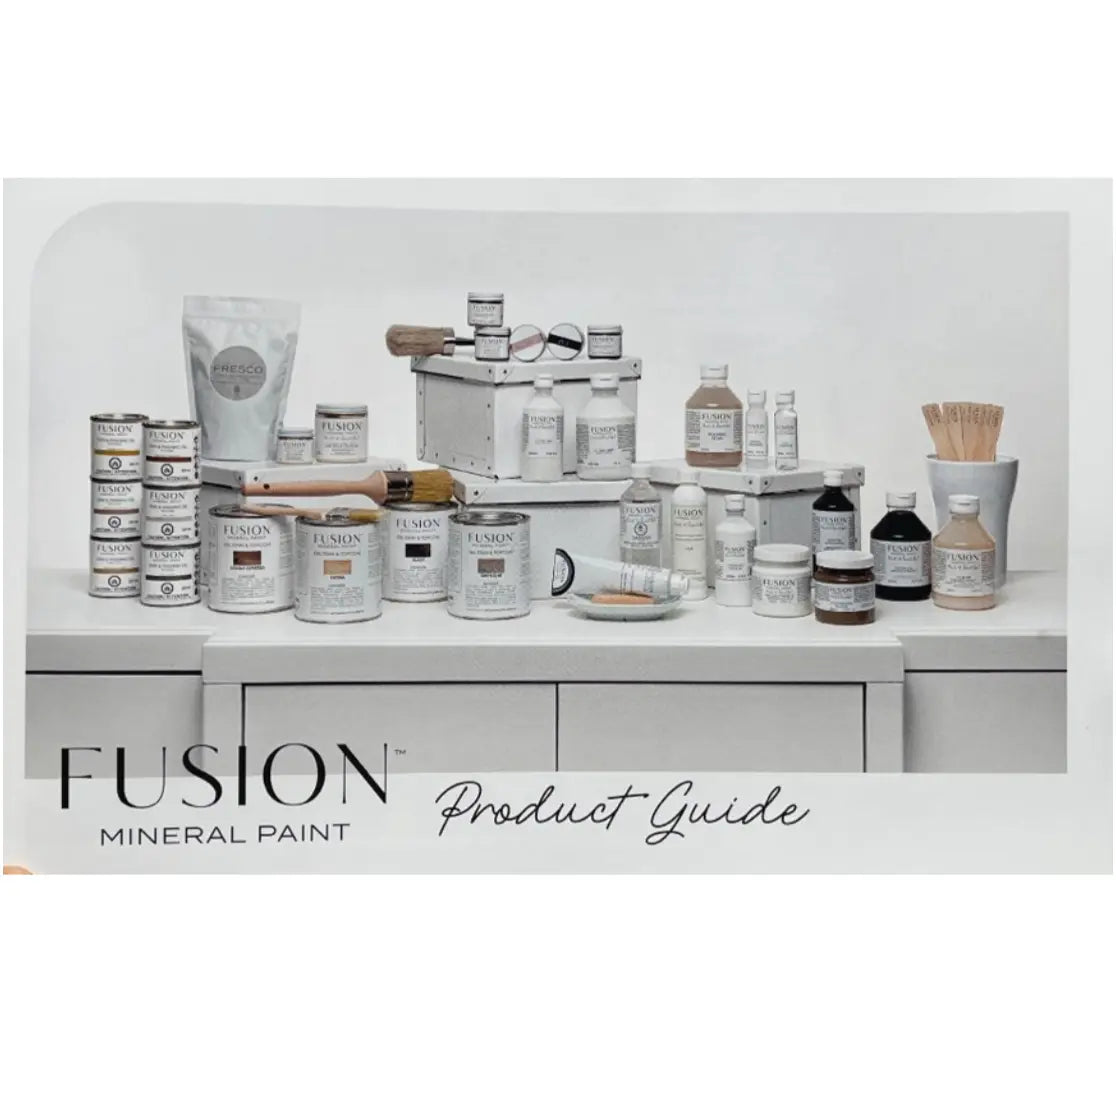 Fusion Product Guide - Home Smith